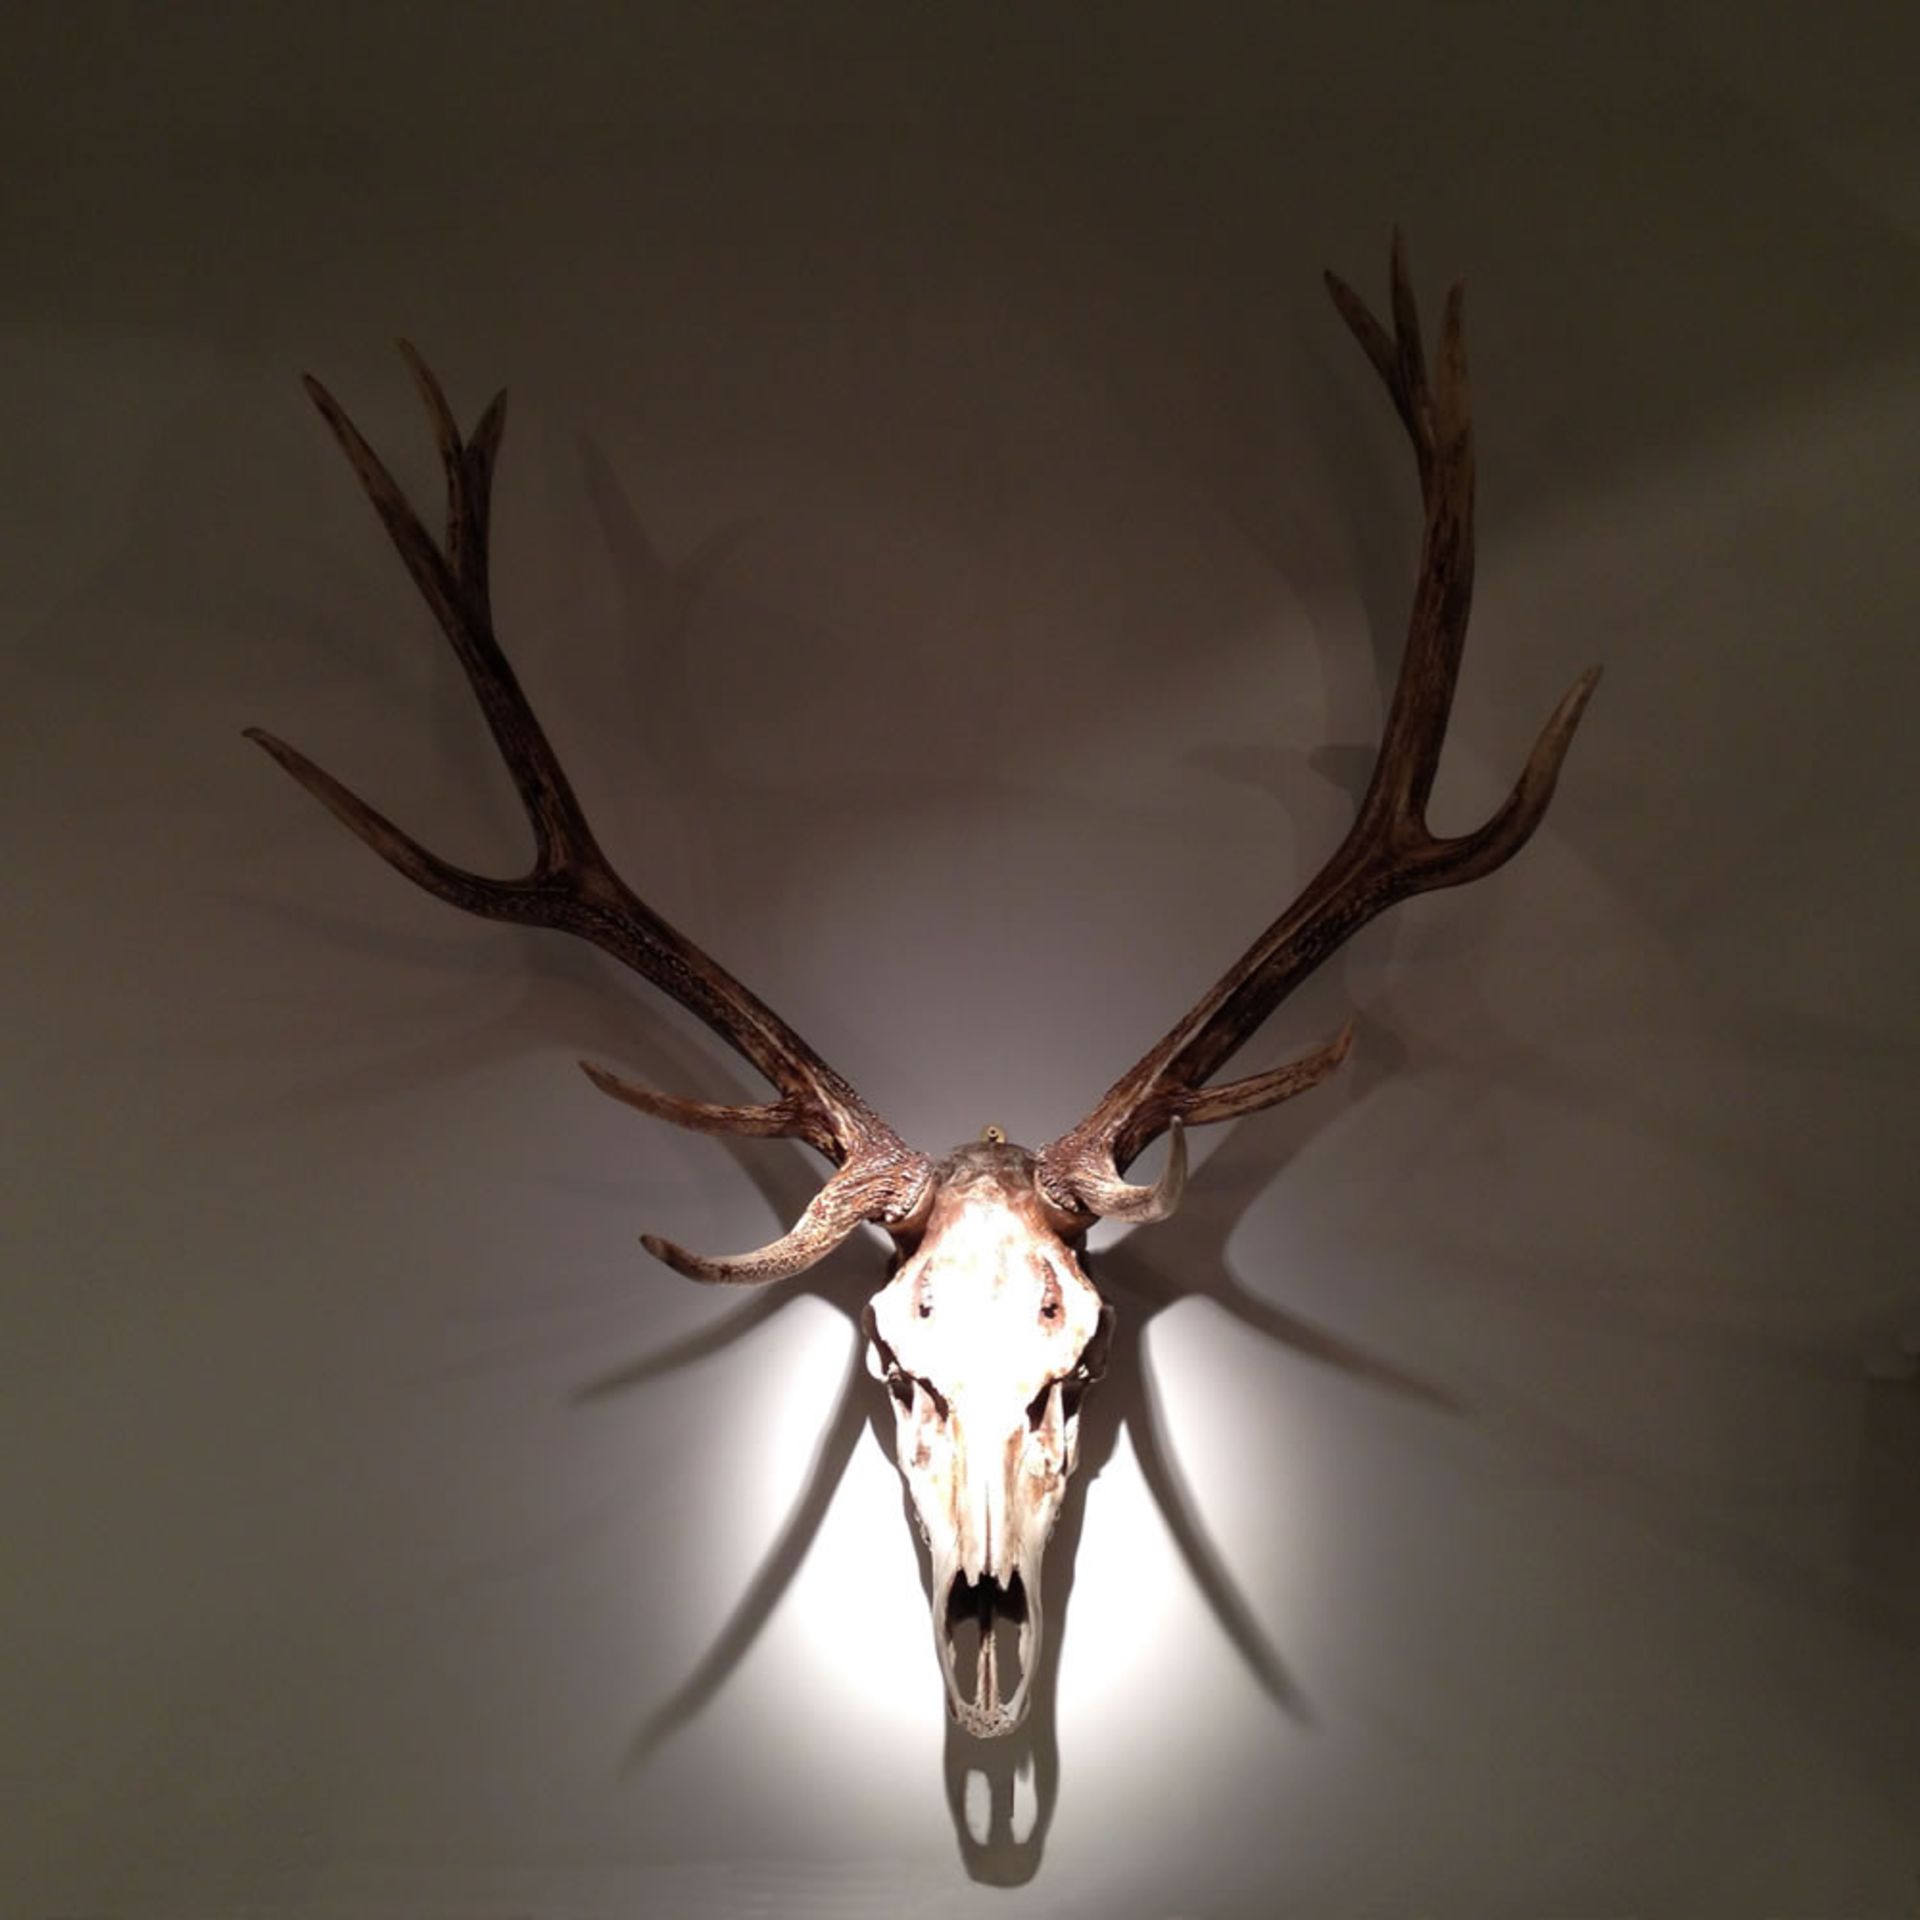 1 x Trophy Deer Skull Wall - Art Decoration - New / Unsuesd Stock - Very Realistic Faux Reproduction